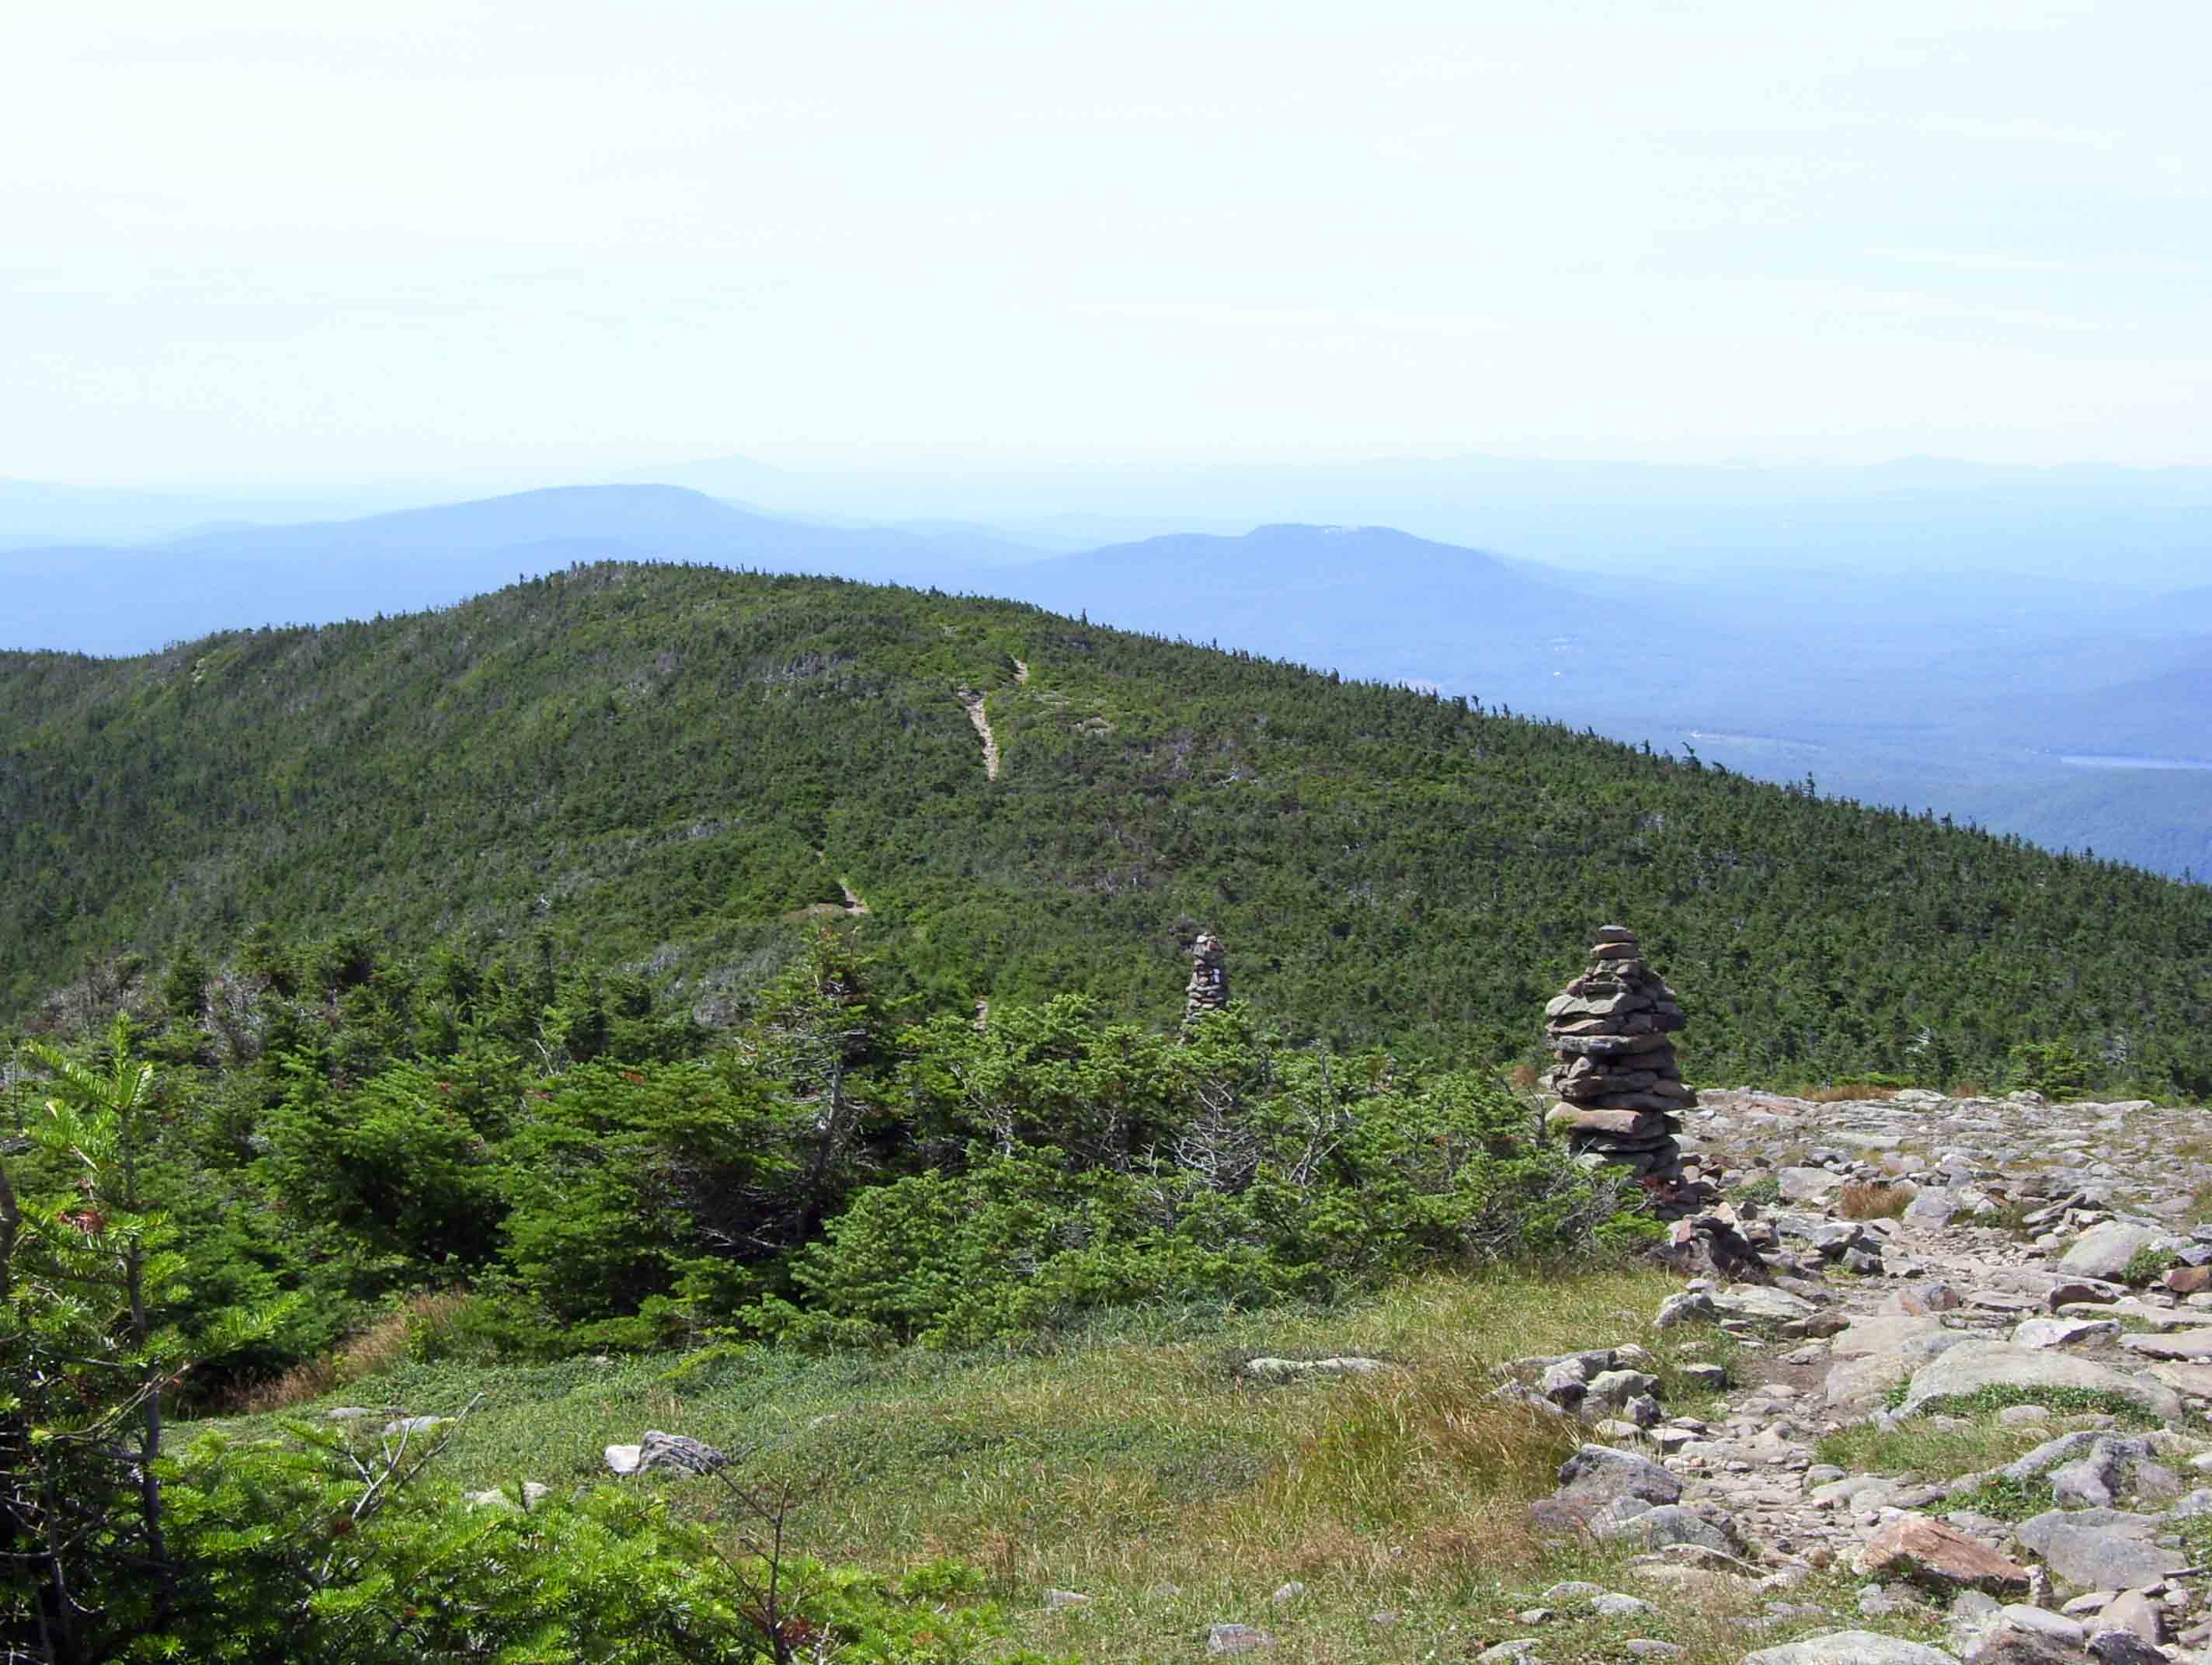 View south along the ridge of Mt. Moosilauke on 8/9/07. The AT here follows the old Carriage Road which used to bring people to the hotel on the summit. Note the two peaks in the distance. The closer is Mt. Cube while the further one is Smarts Mt., both of which the AT to the south crosses. Taken from approx. Mile 3.9.  Courtesy dlcul@conncoll.edu